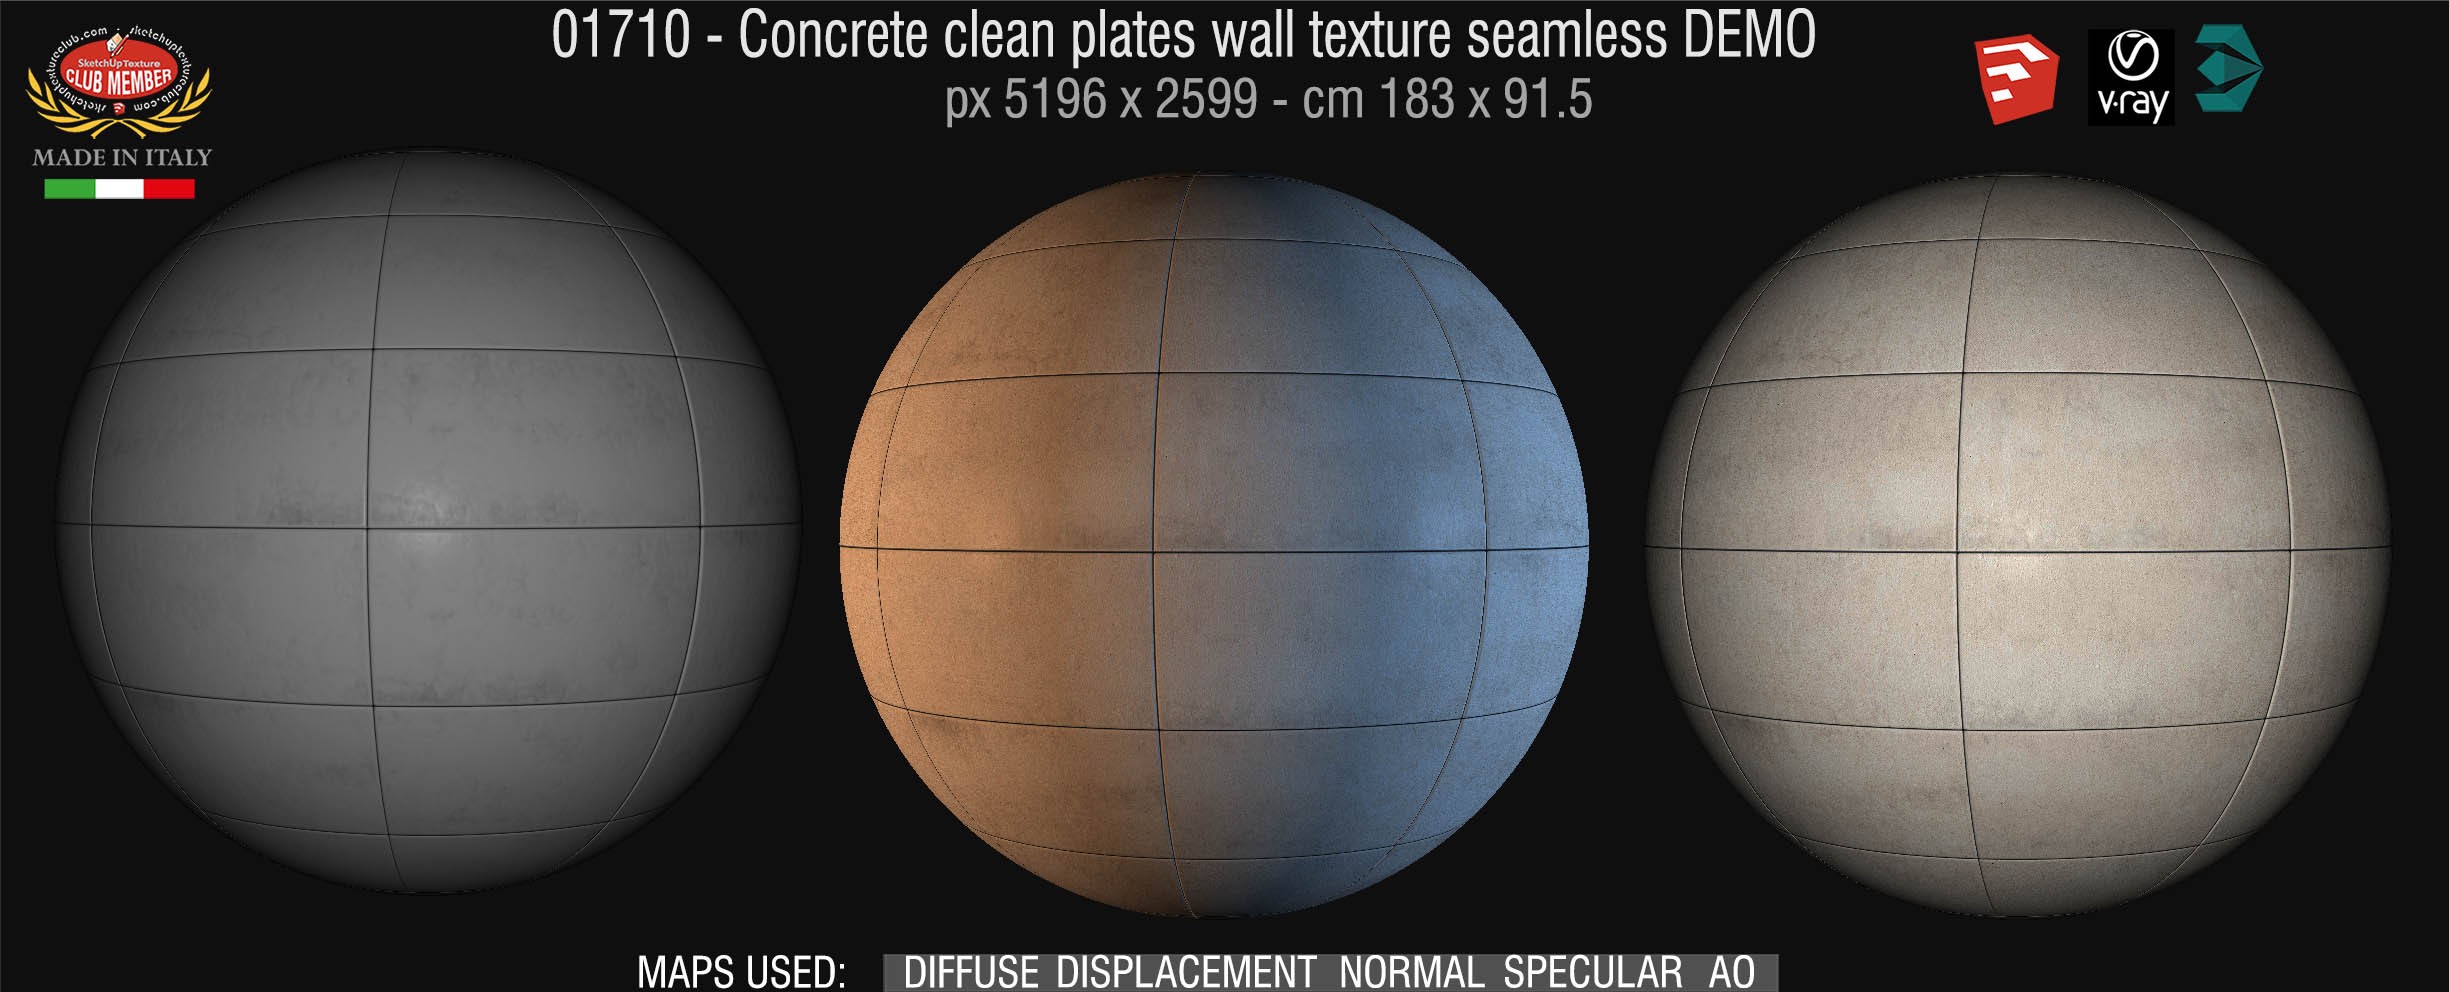 01710 Concrete clean plates wall texture seamless + maps DEMO